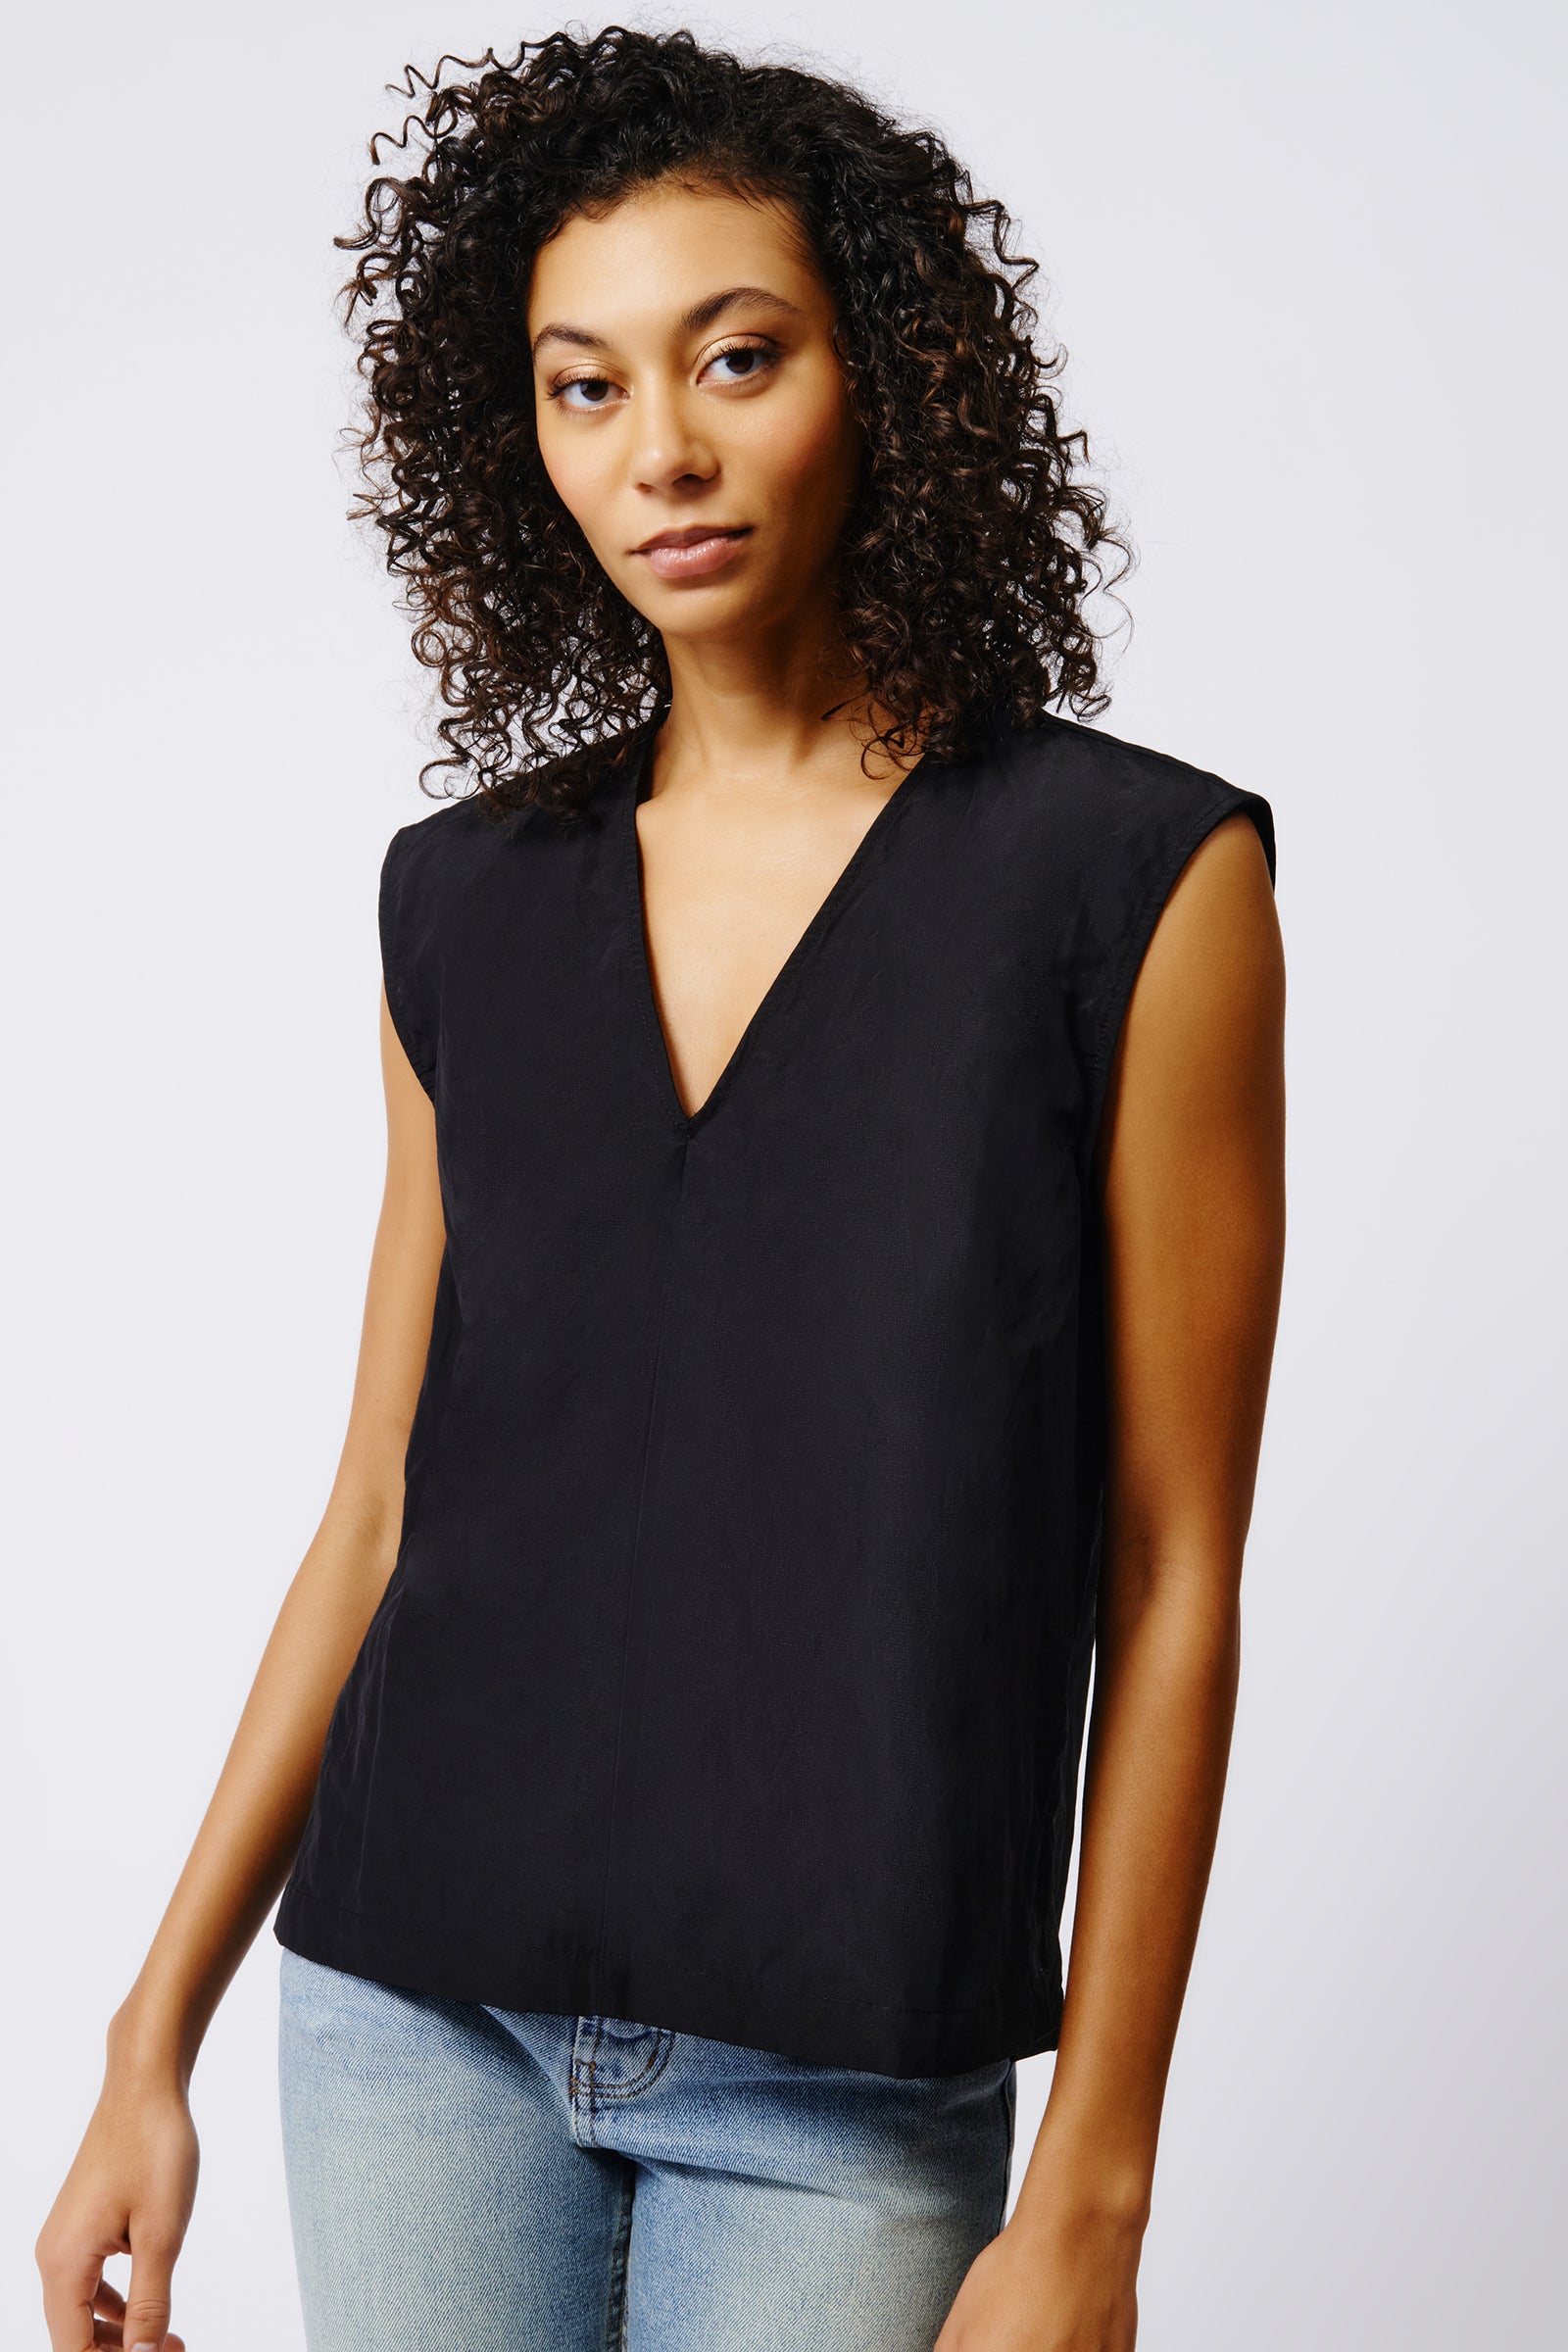 Kal Rieman Ava V Neck Shell in Black on Model Front View Crop 5